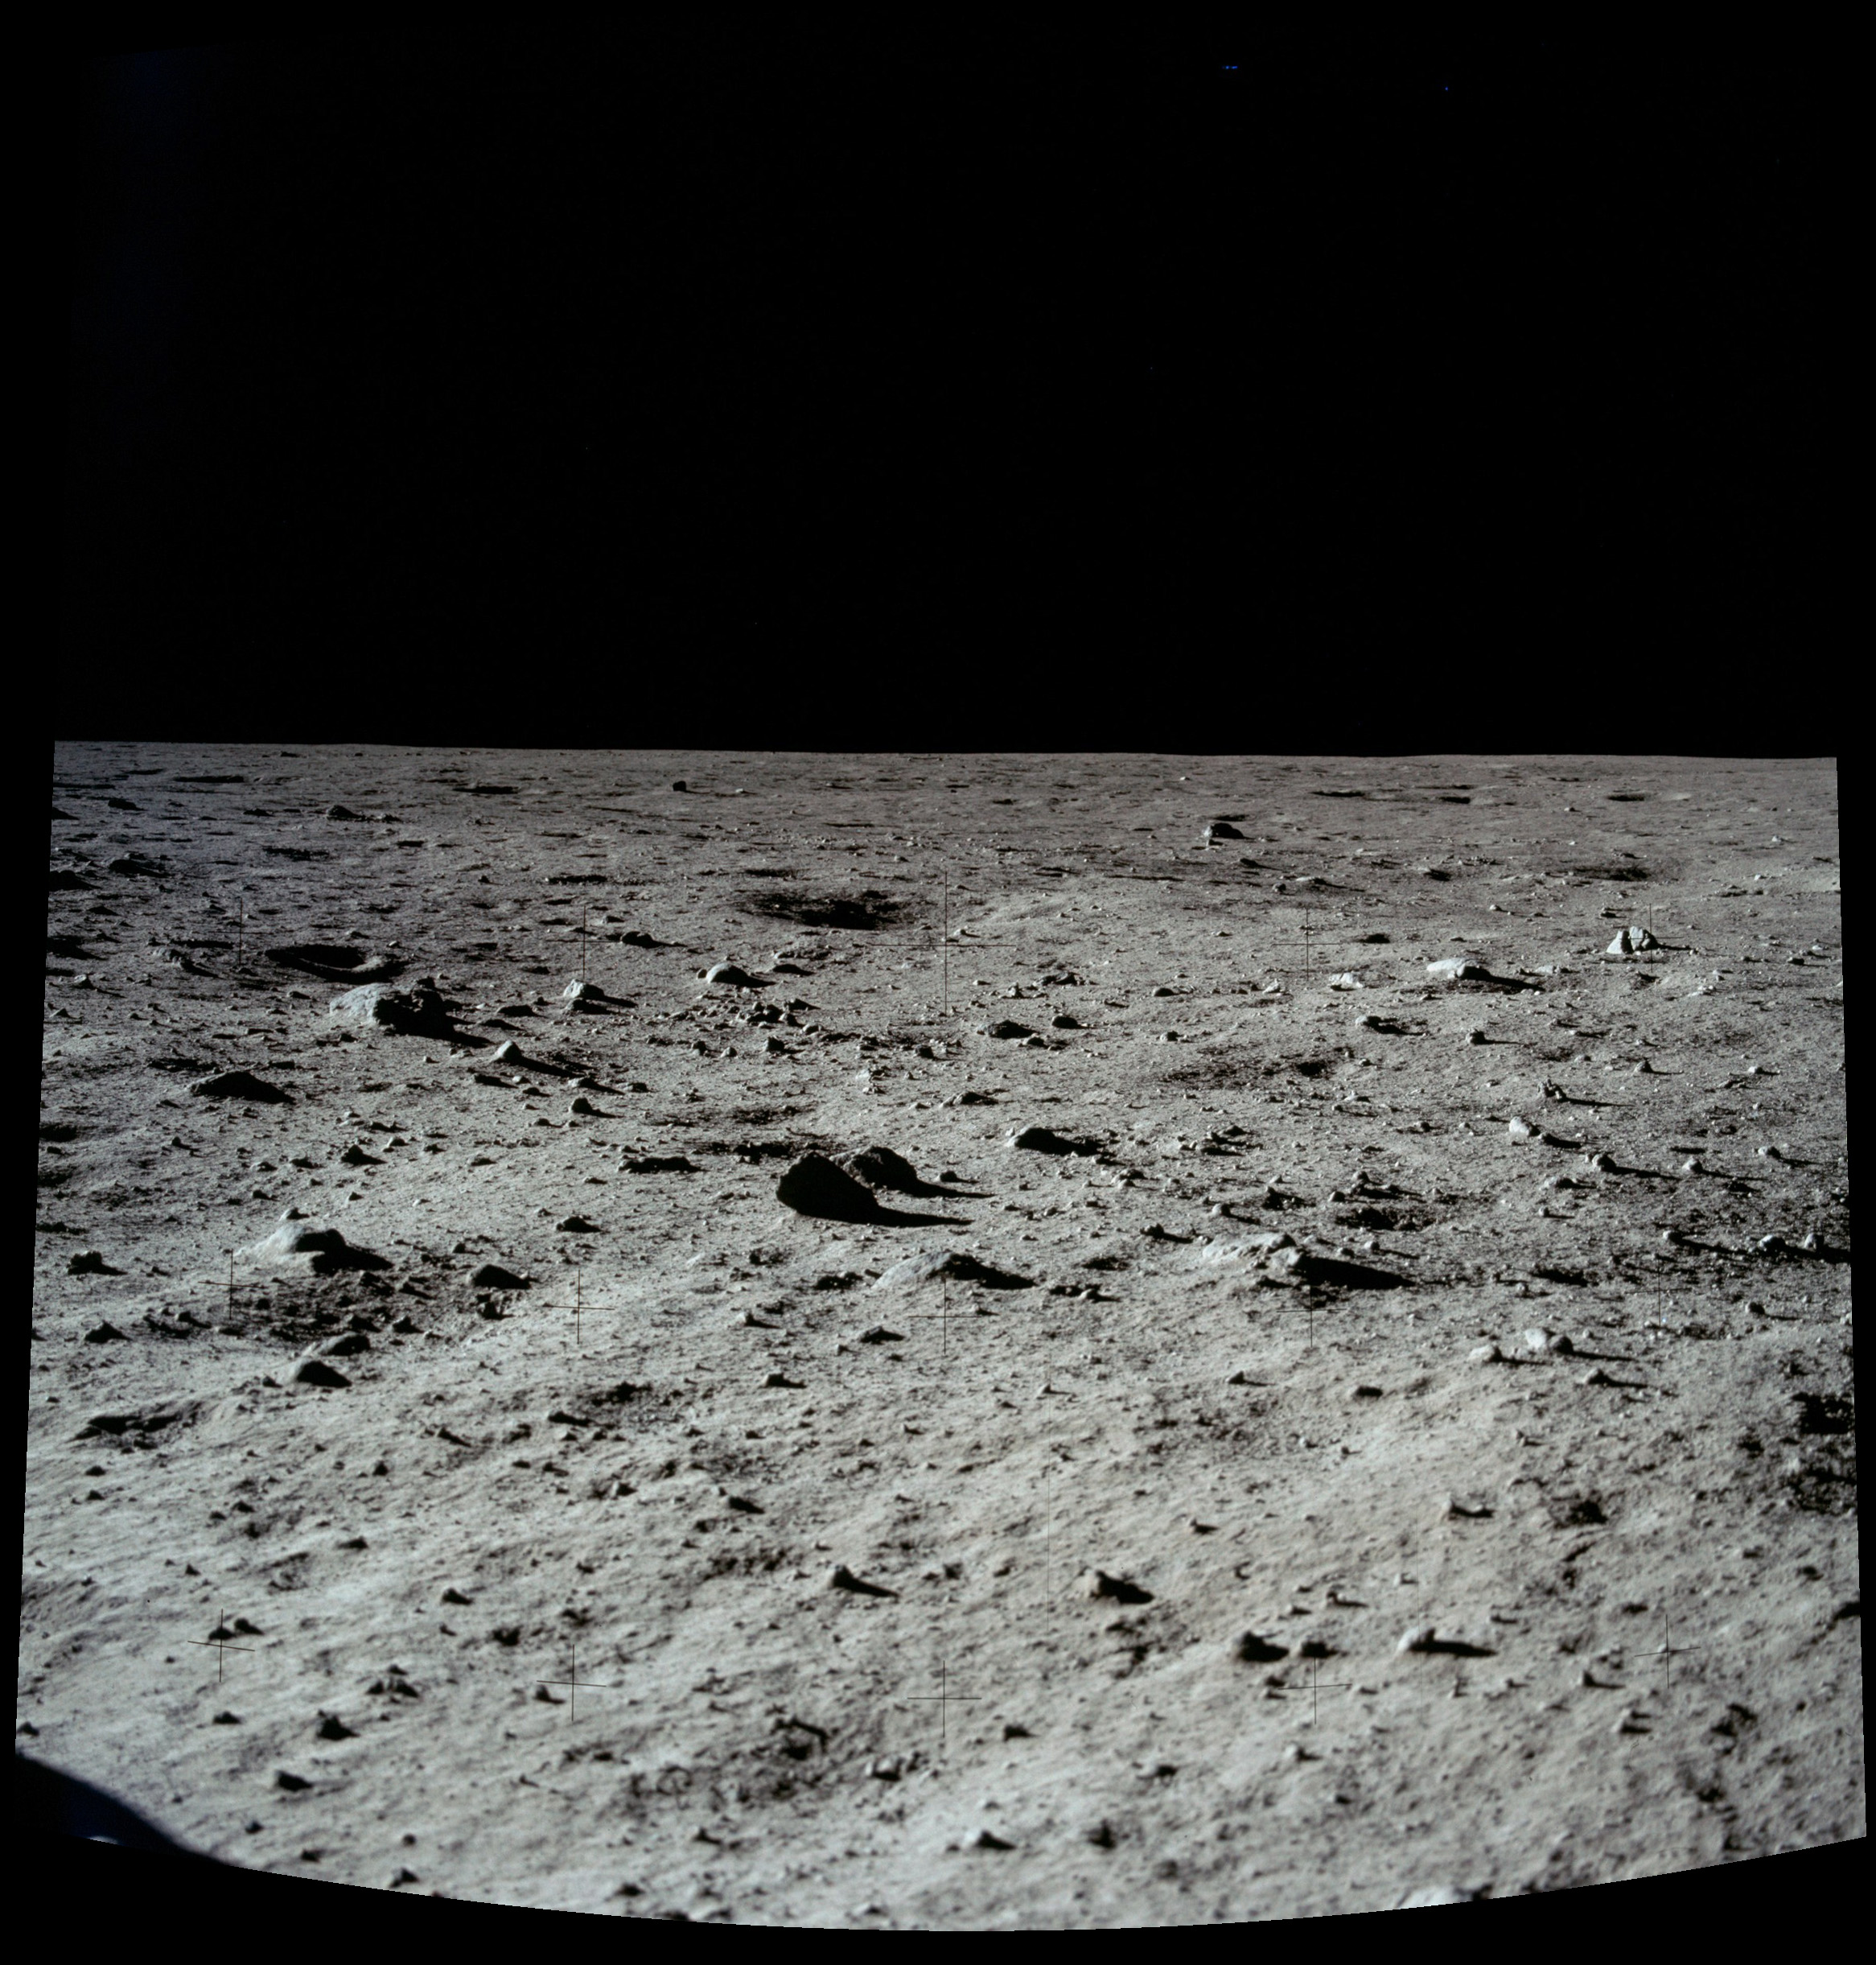 A view to the lunar desolation pictured by the Apollo 11 astronauts shortly after the historic landing on July 20, 1969.